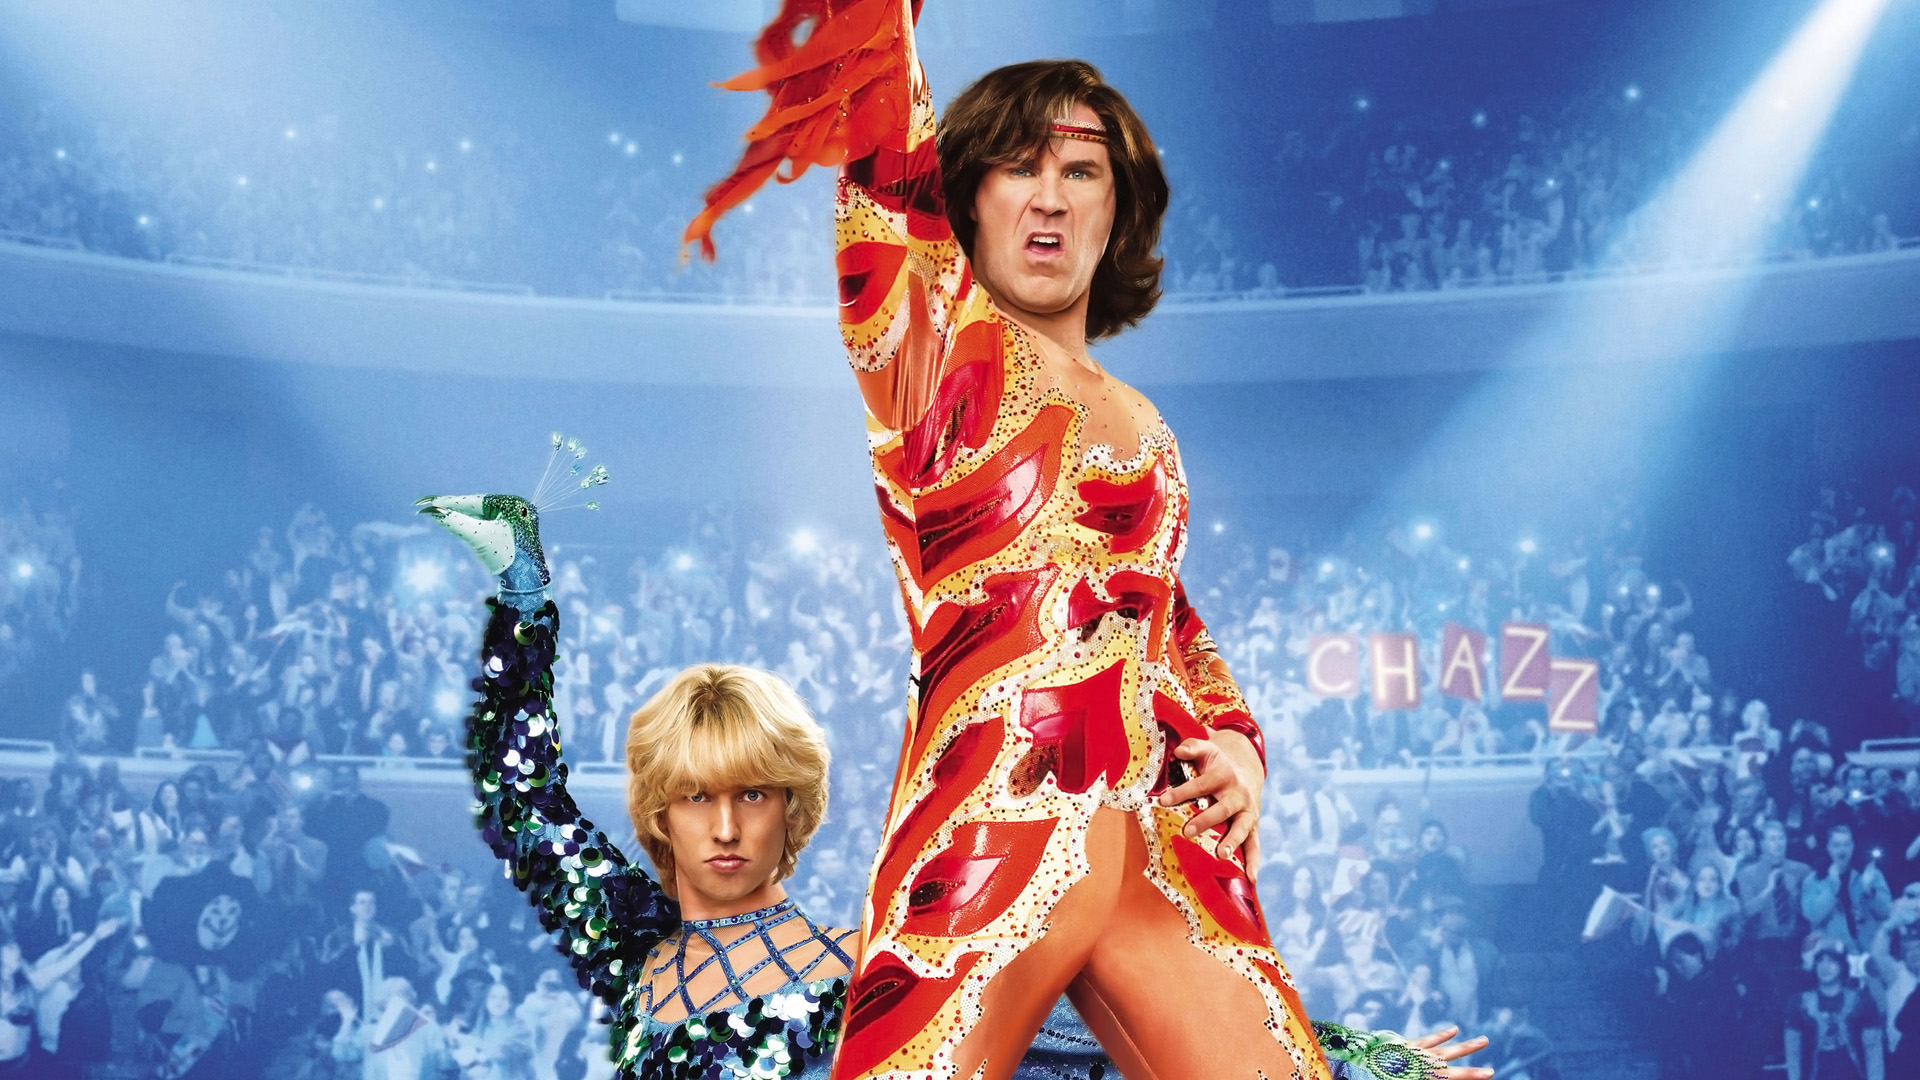 Blades of Glory Images. 